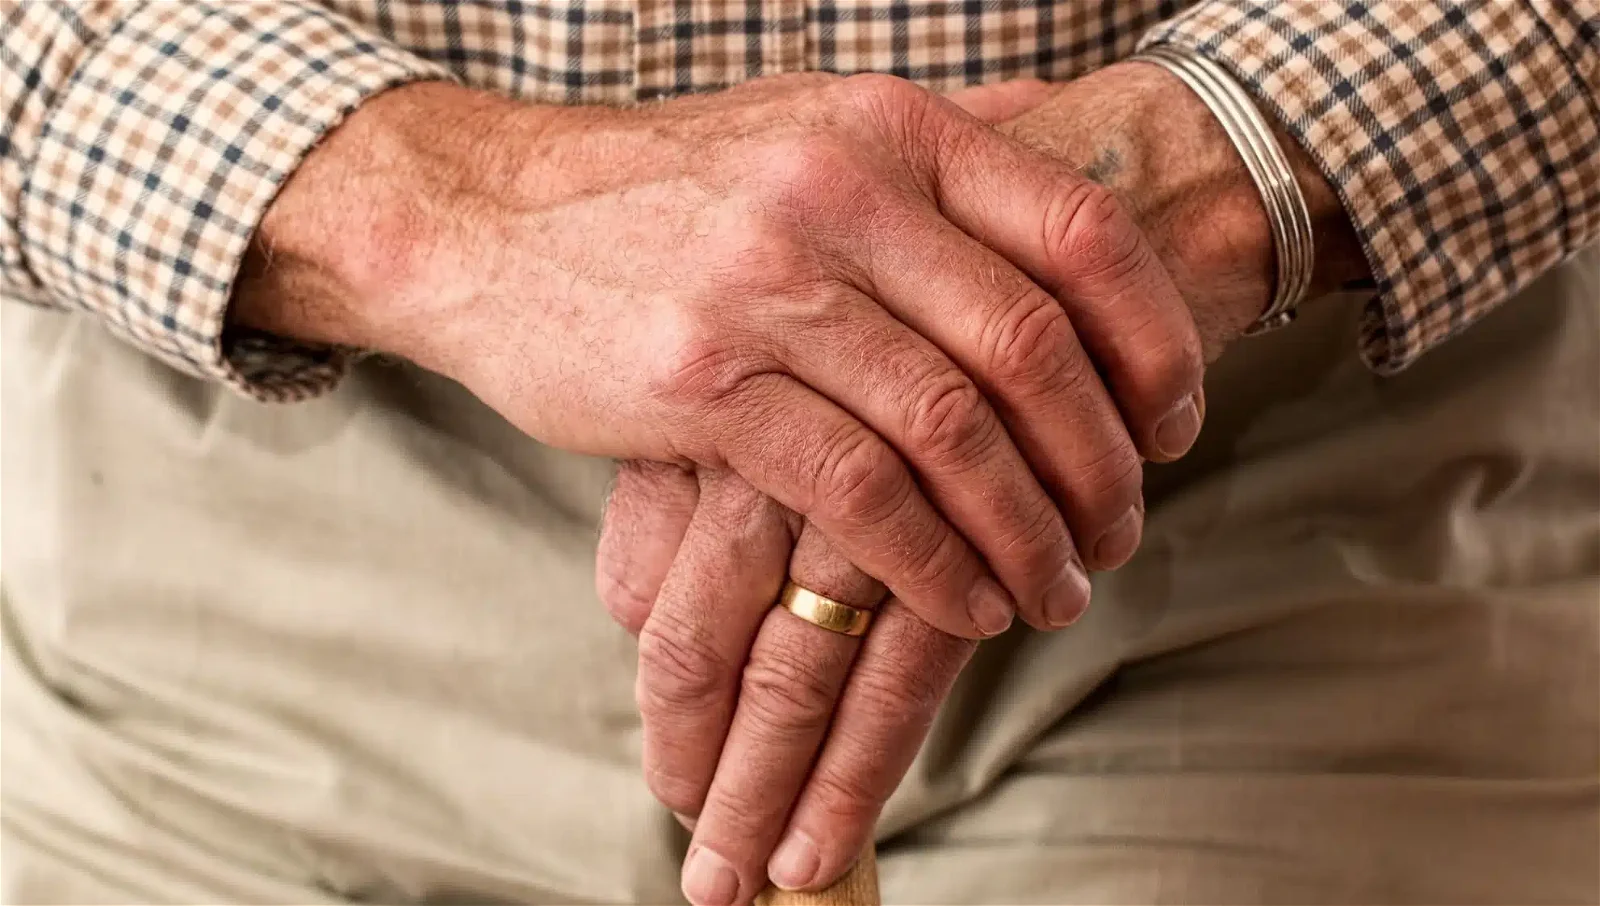 Close-up of elderly hands resting on a cane. The person is wearing a plaid shirt, a ring on one finger, and a bracelet.